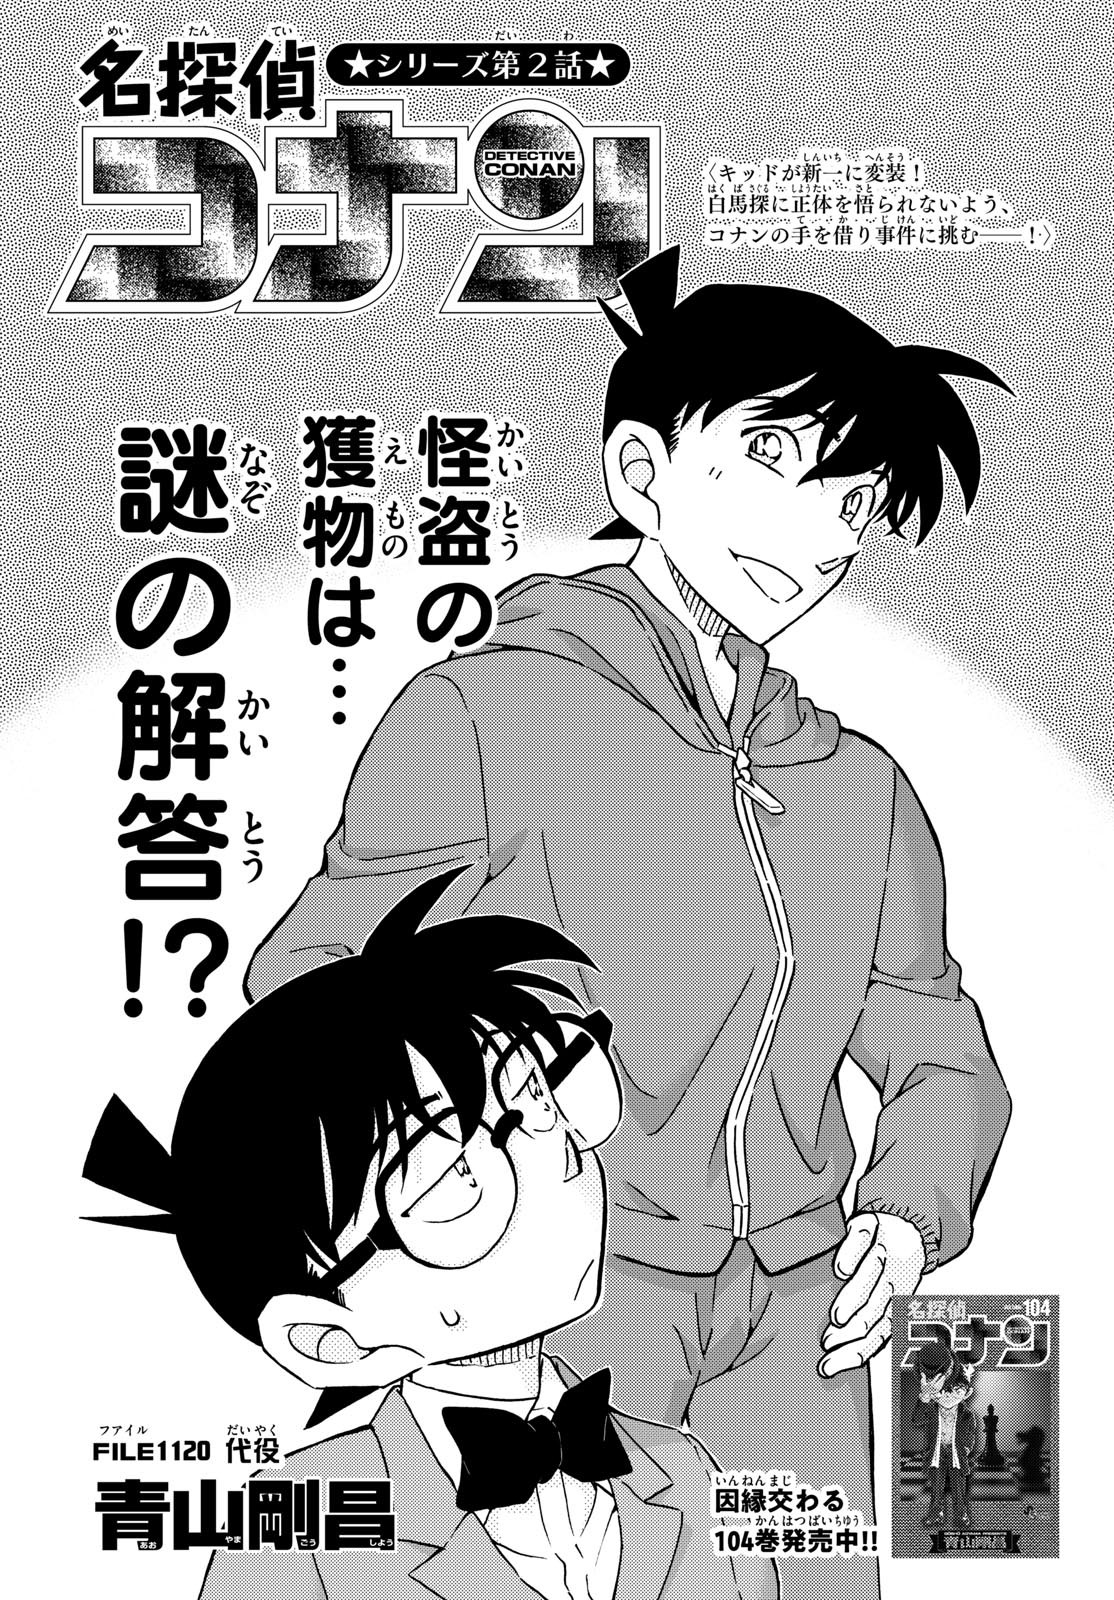 Detective Conan - Chapter 1120 - Page 1